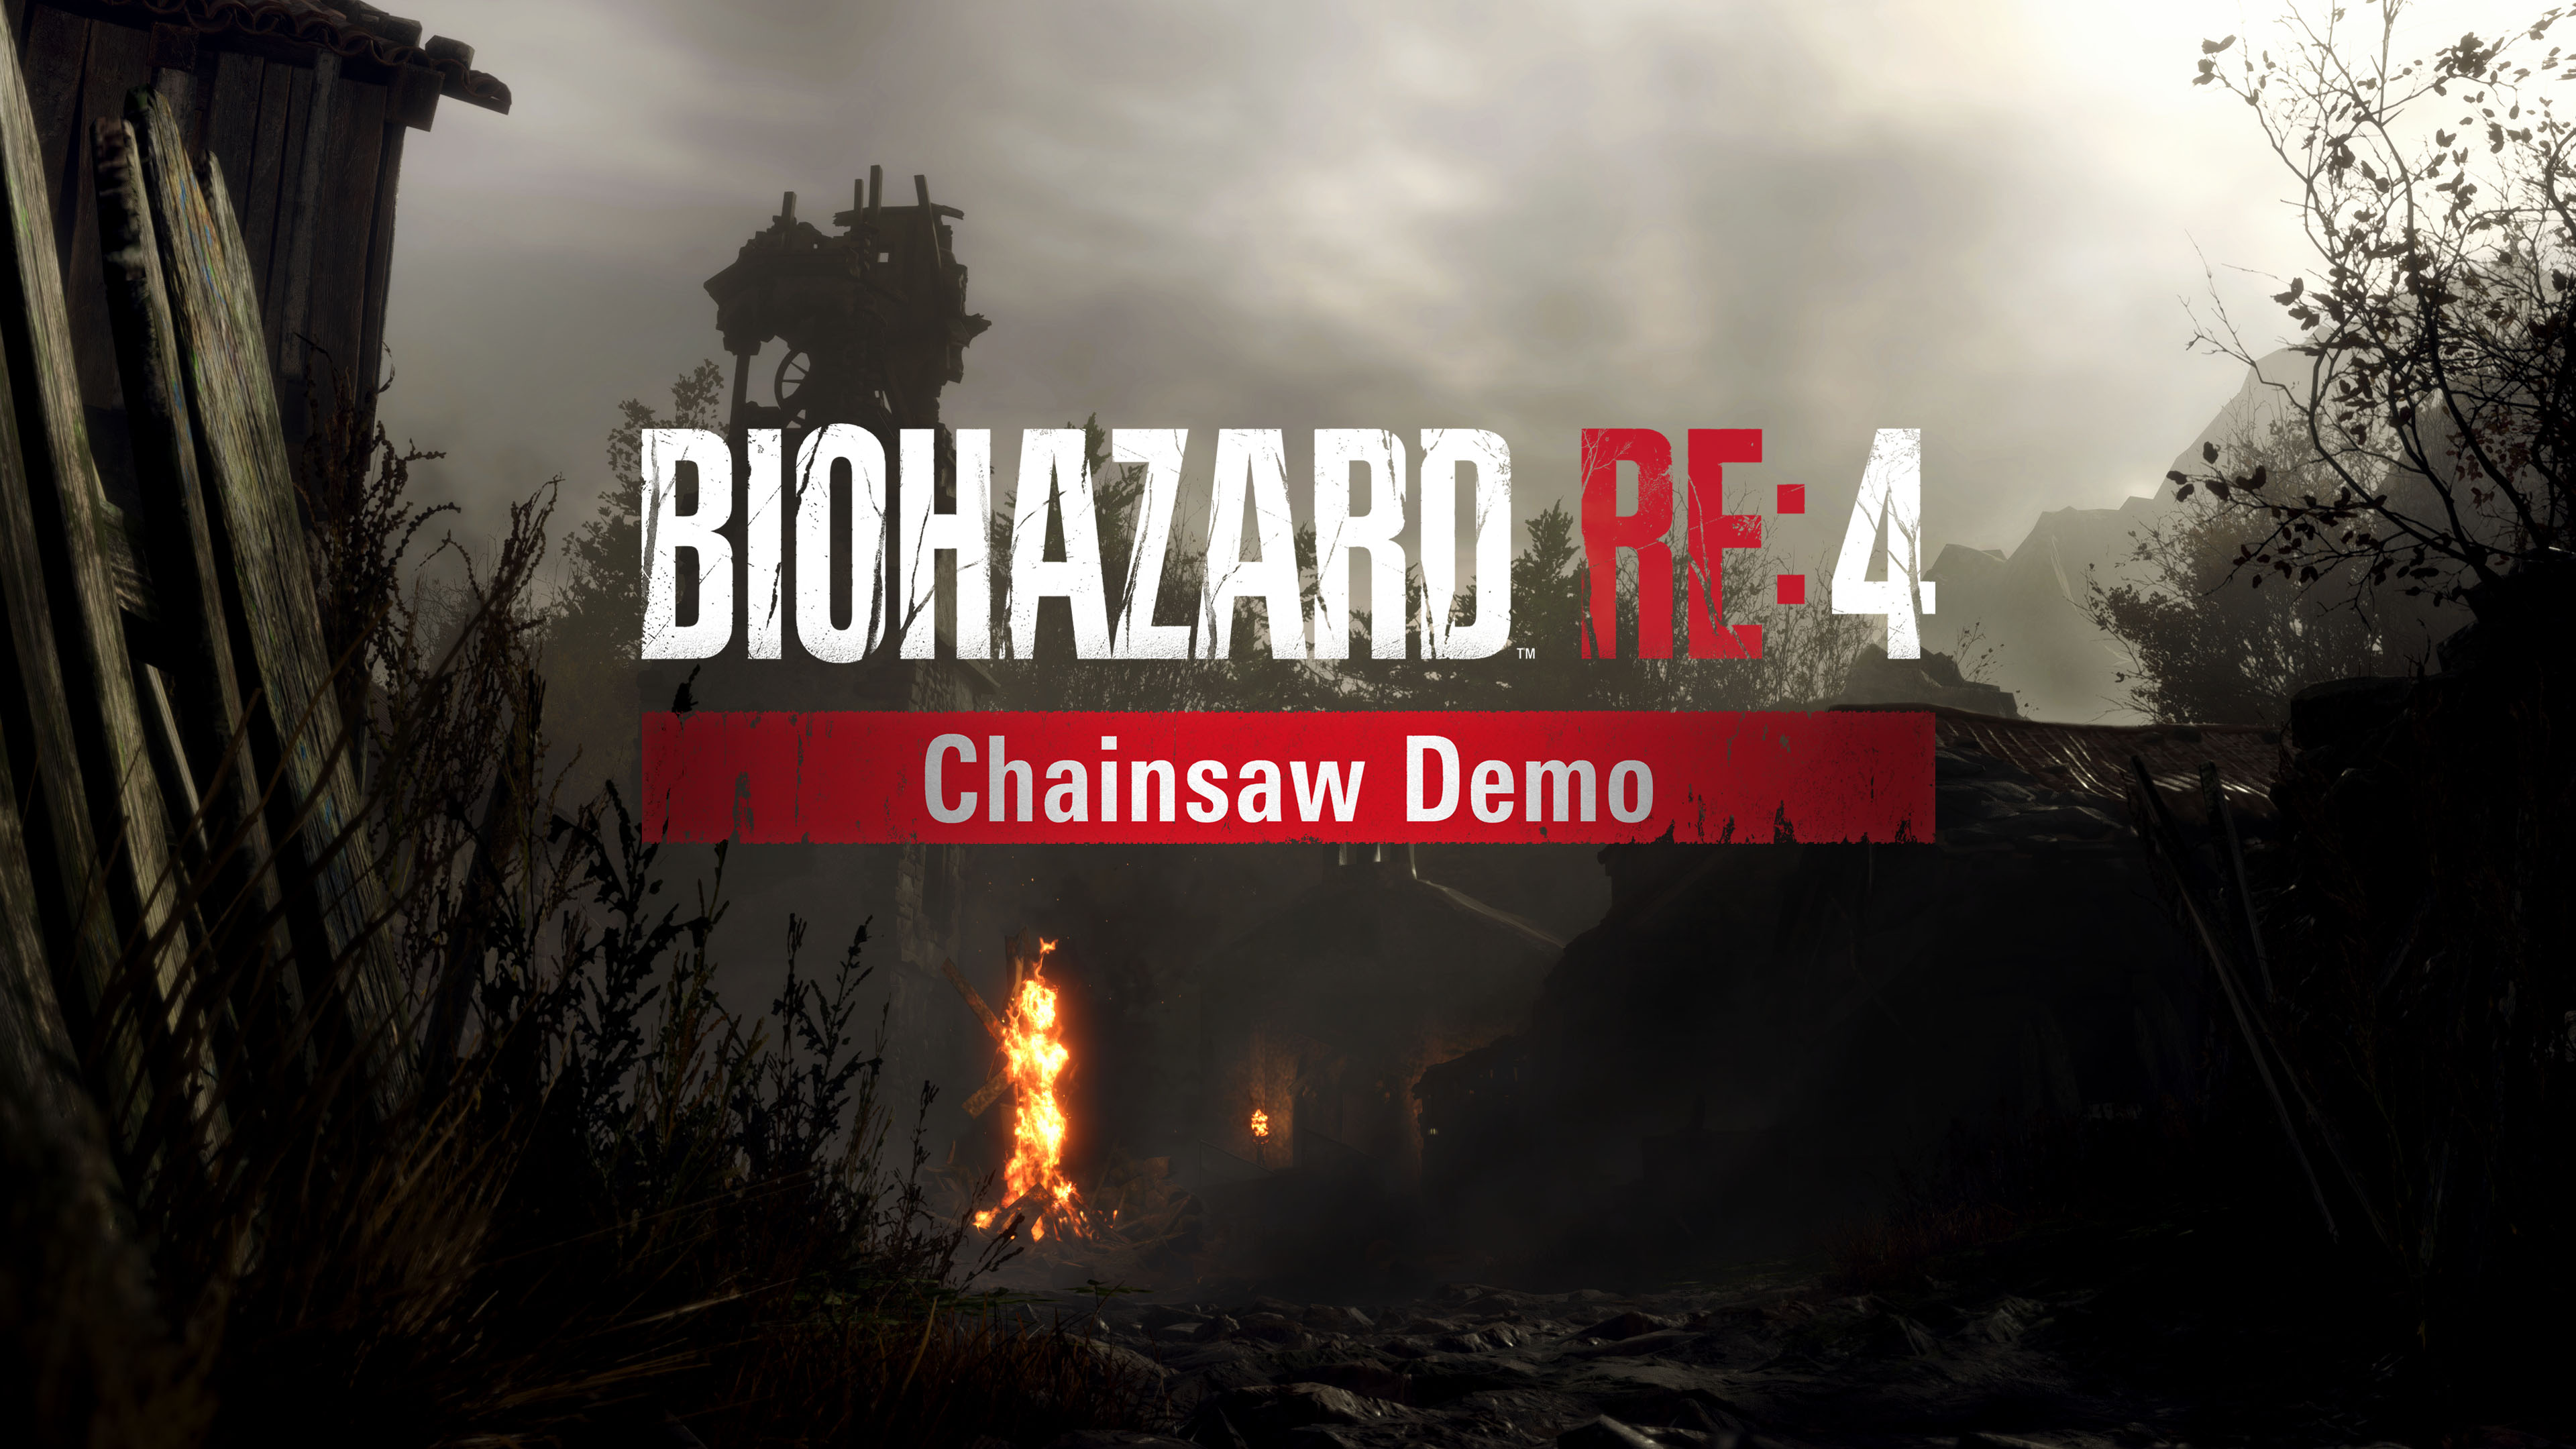 Resident Evil 4 Chainsaw Demo - Download